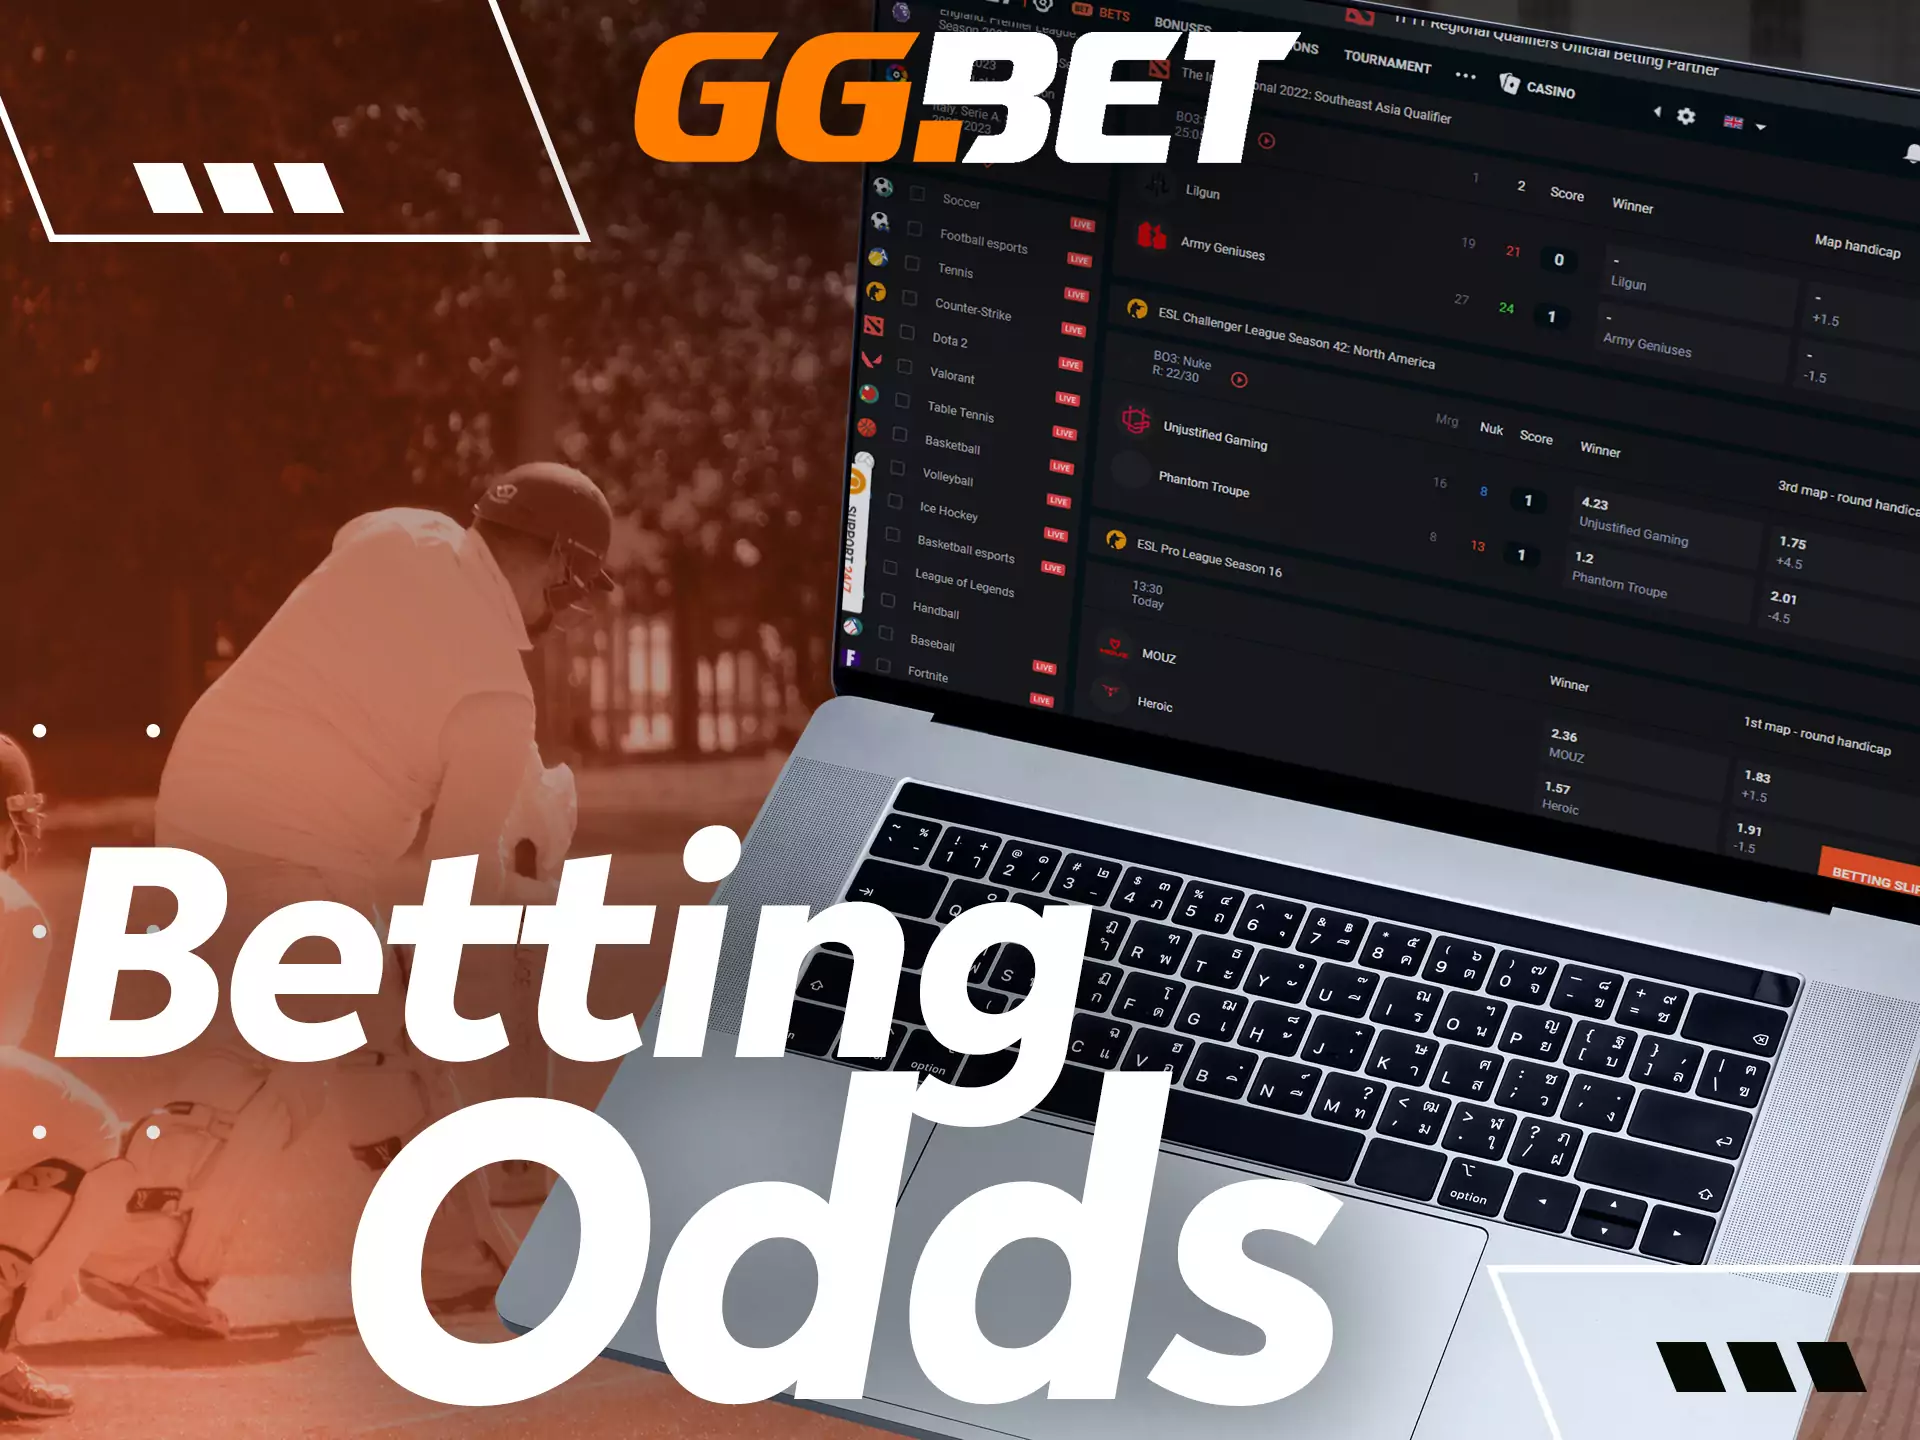 GGBet always suggests high odds on the most popular sports events.